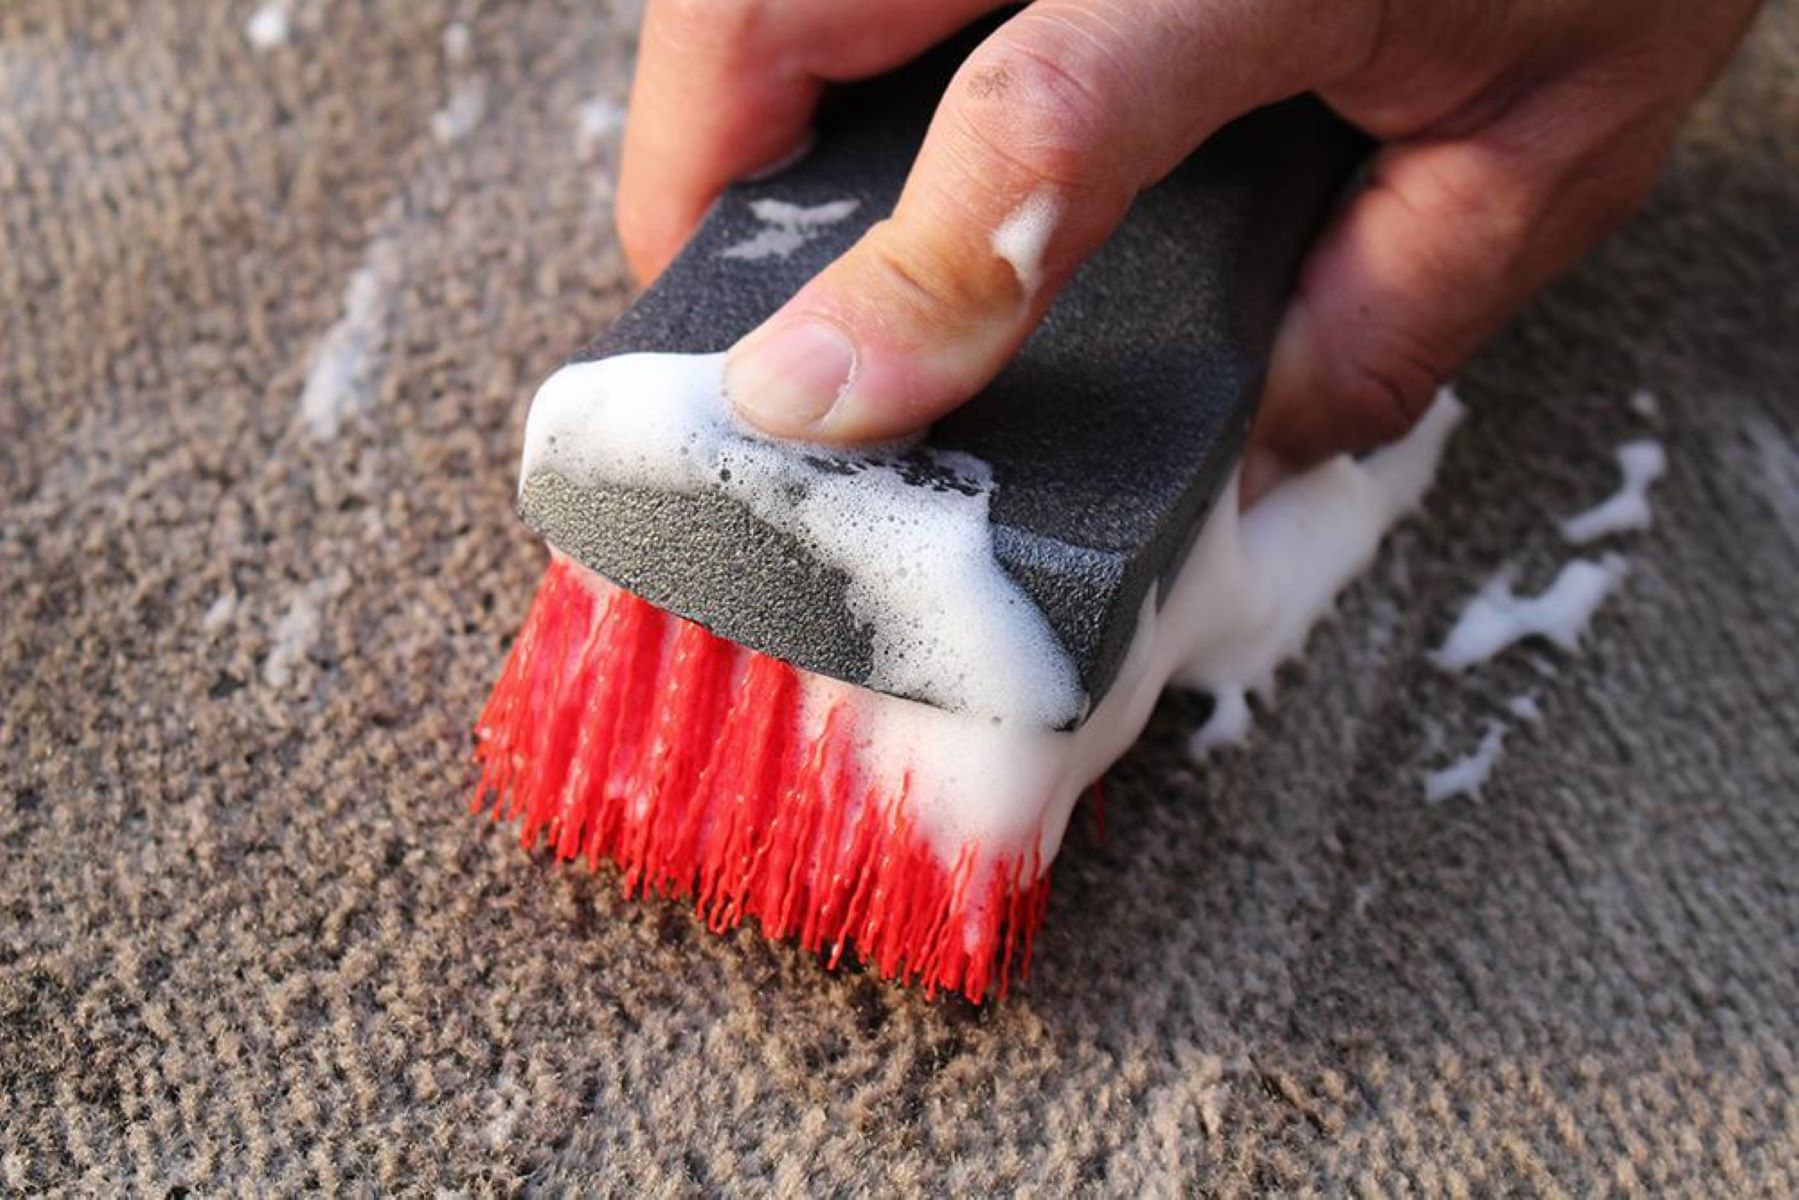 How To Remove Acrylic Paint From A Carpet